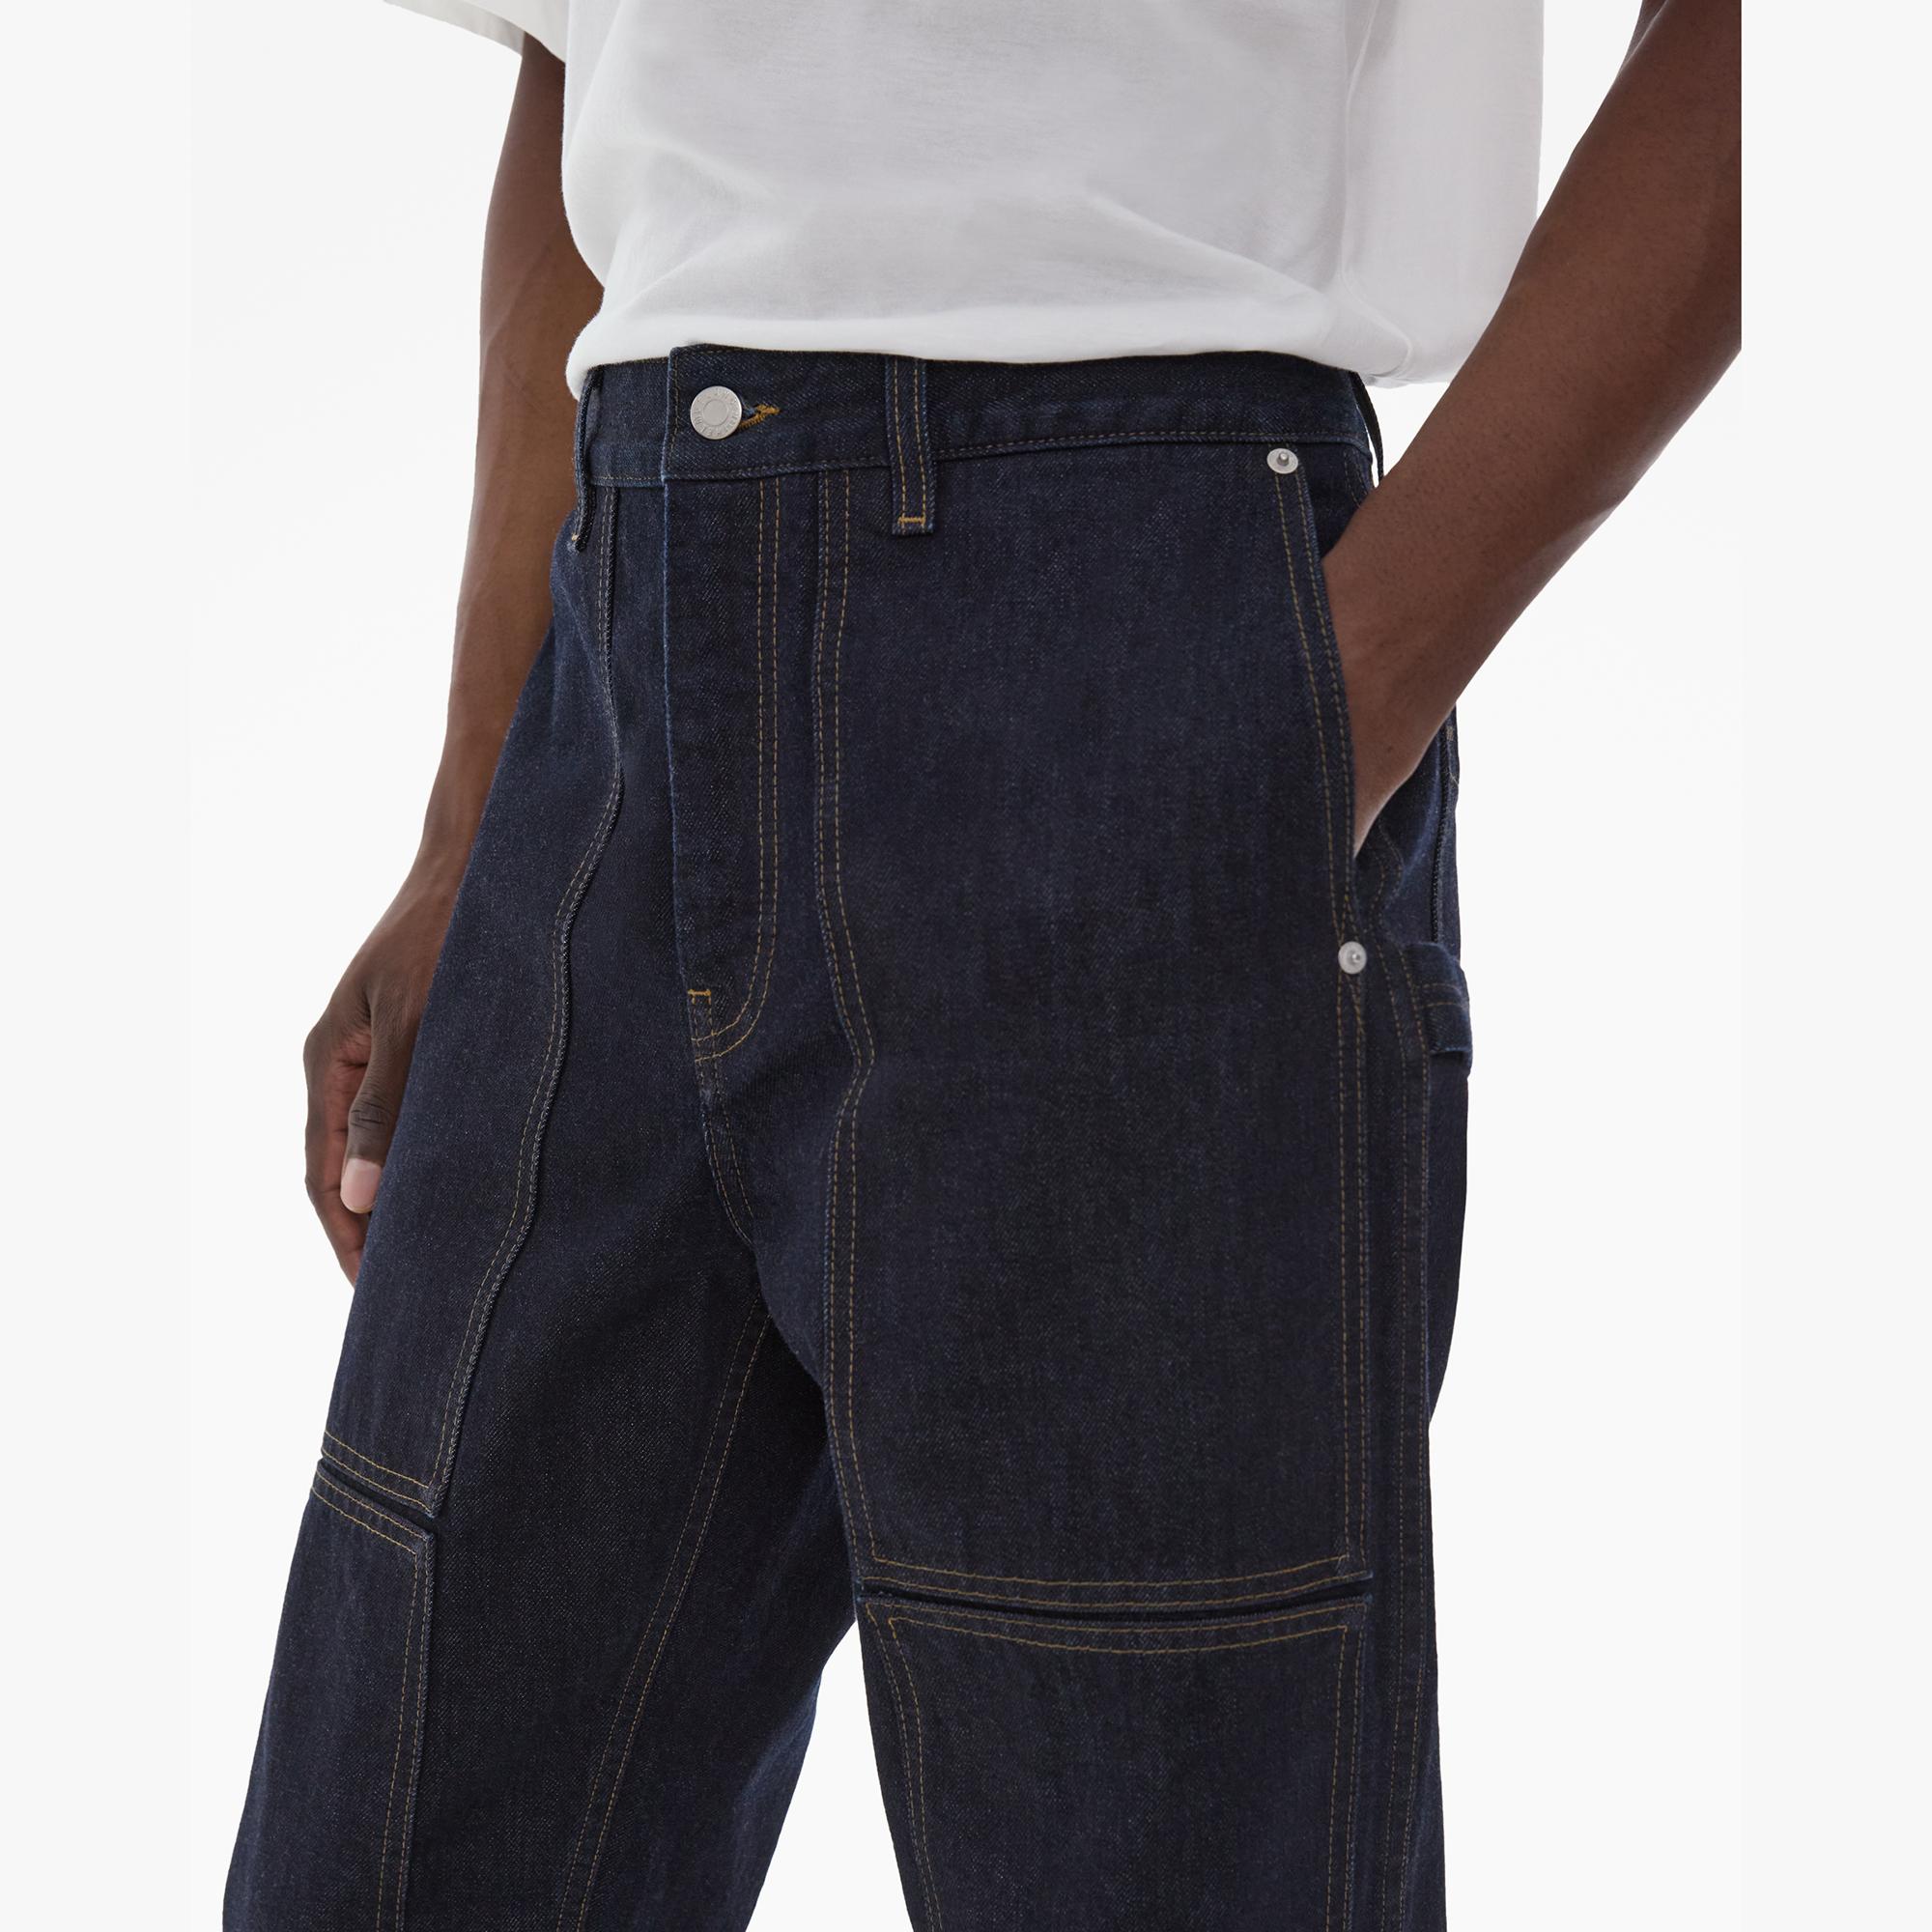 Helmut Lang Painter Jeans: The Trousers that Changed Denim